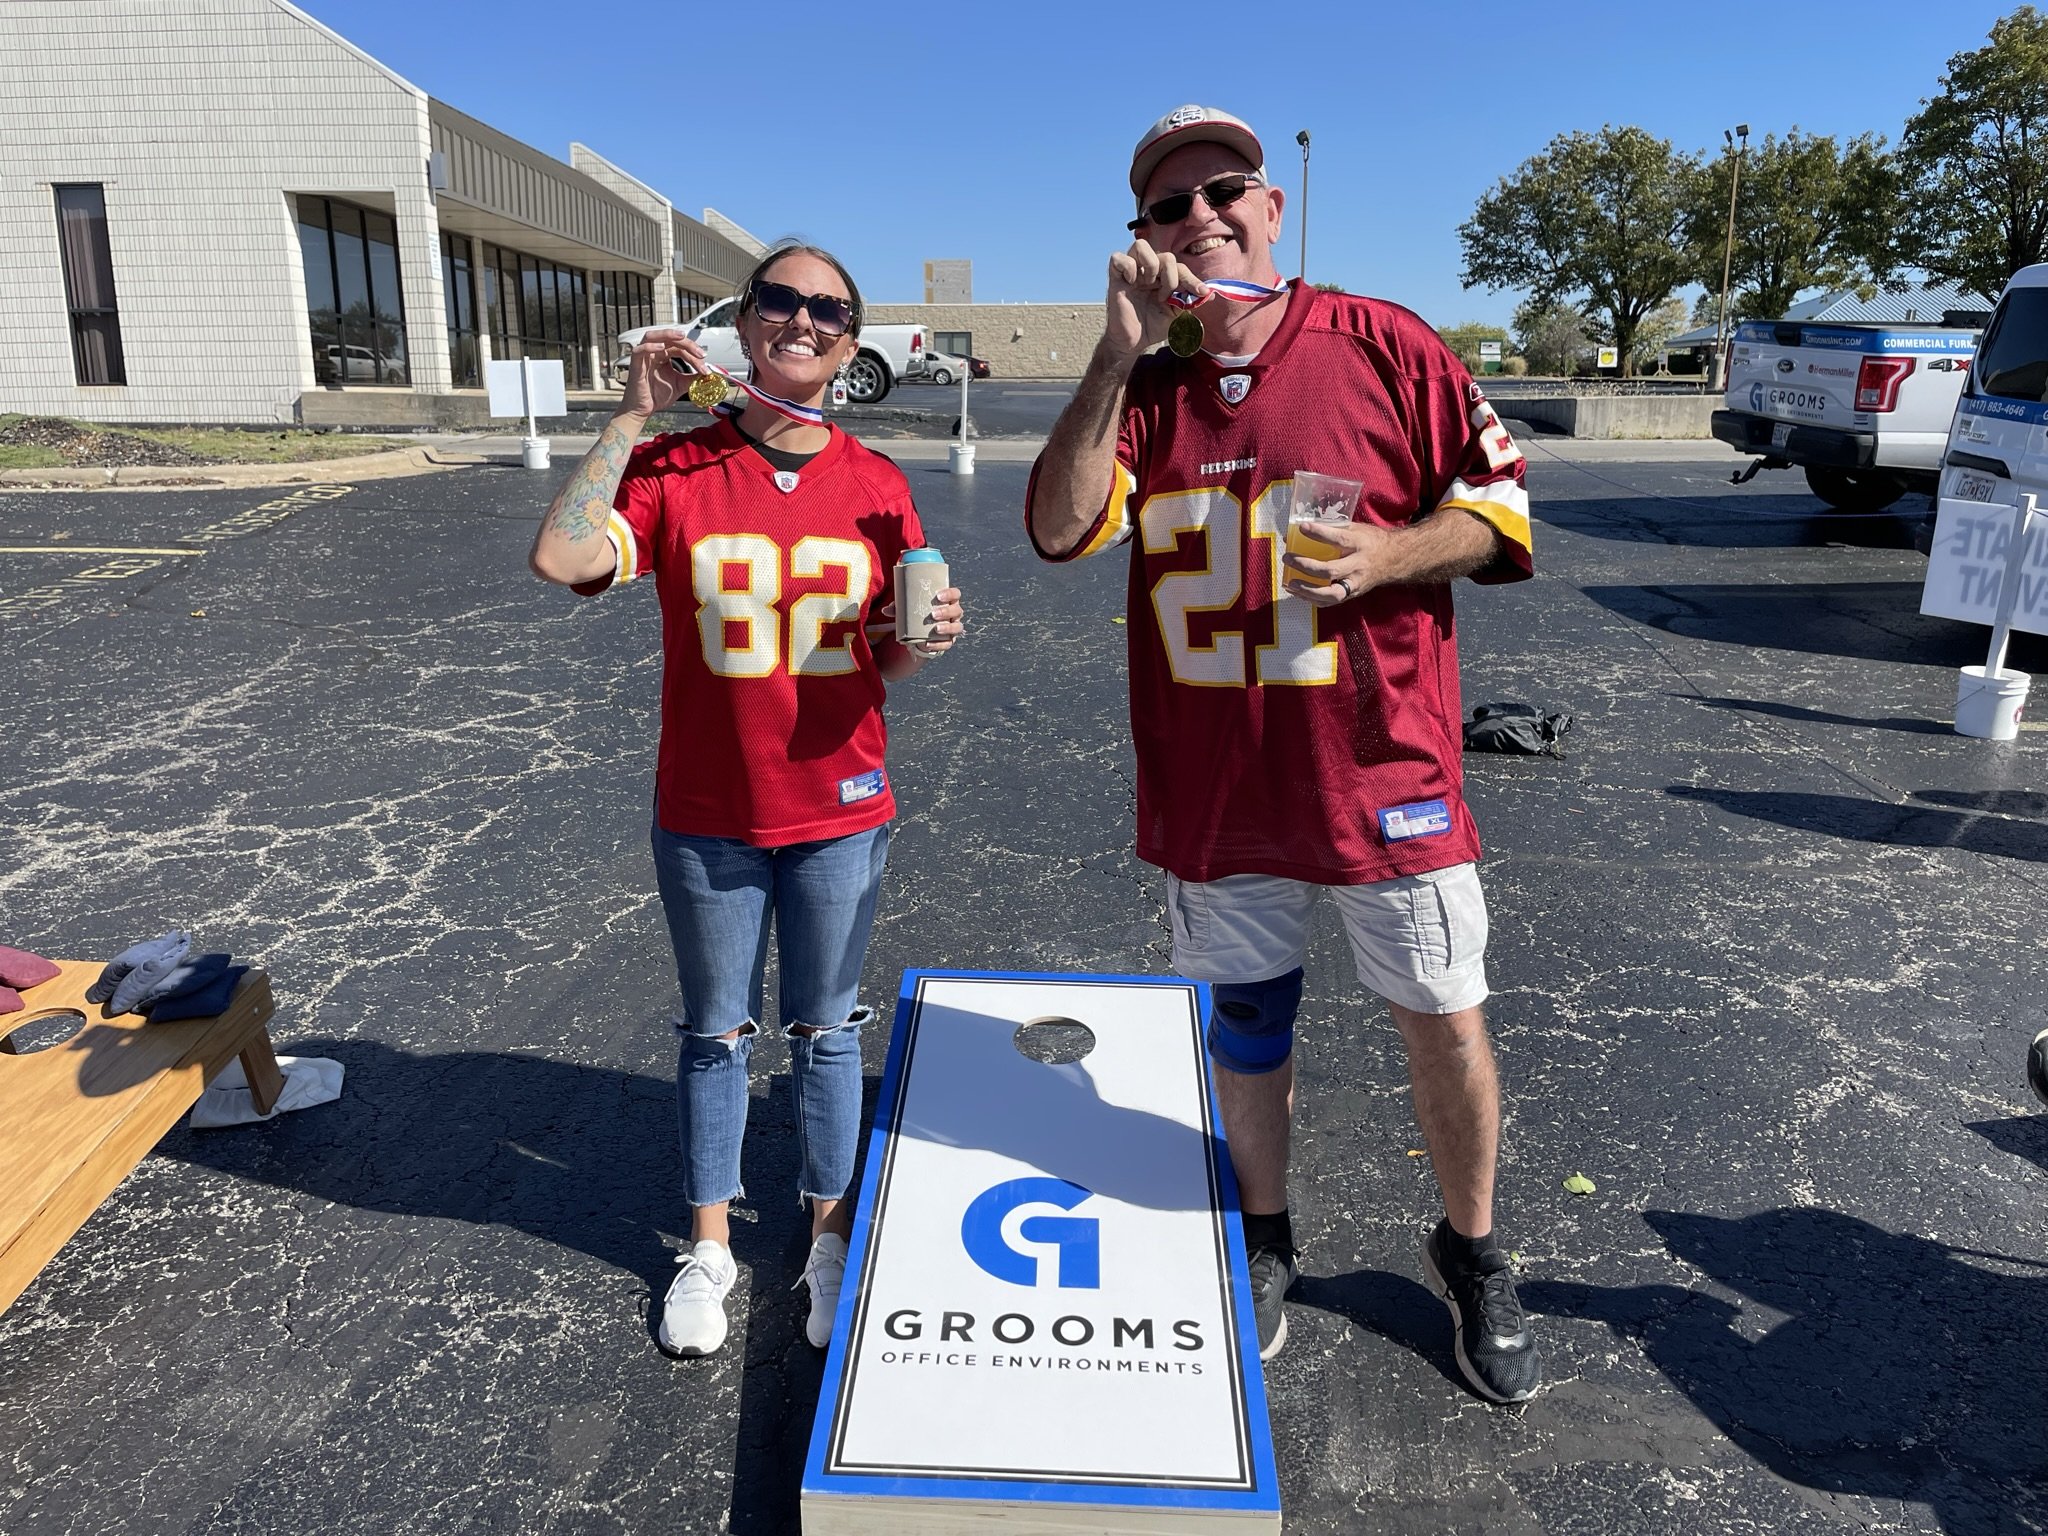 Grooms Office Environments Cornhole Tournament Winners 2022-Maggie and Larry.JPEG